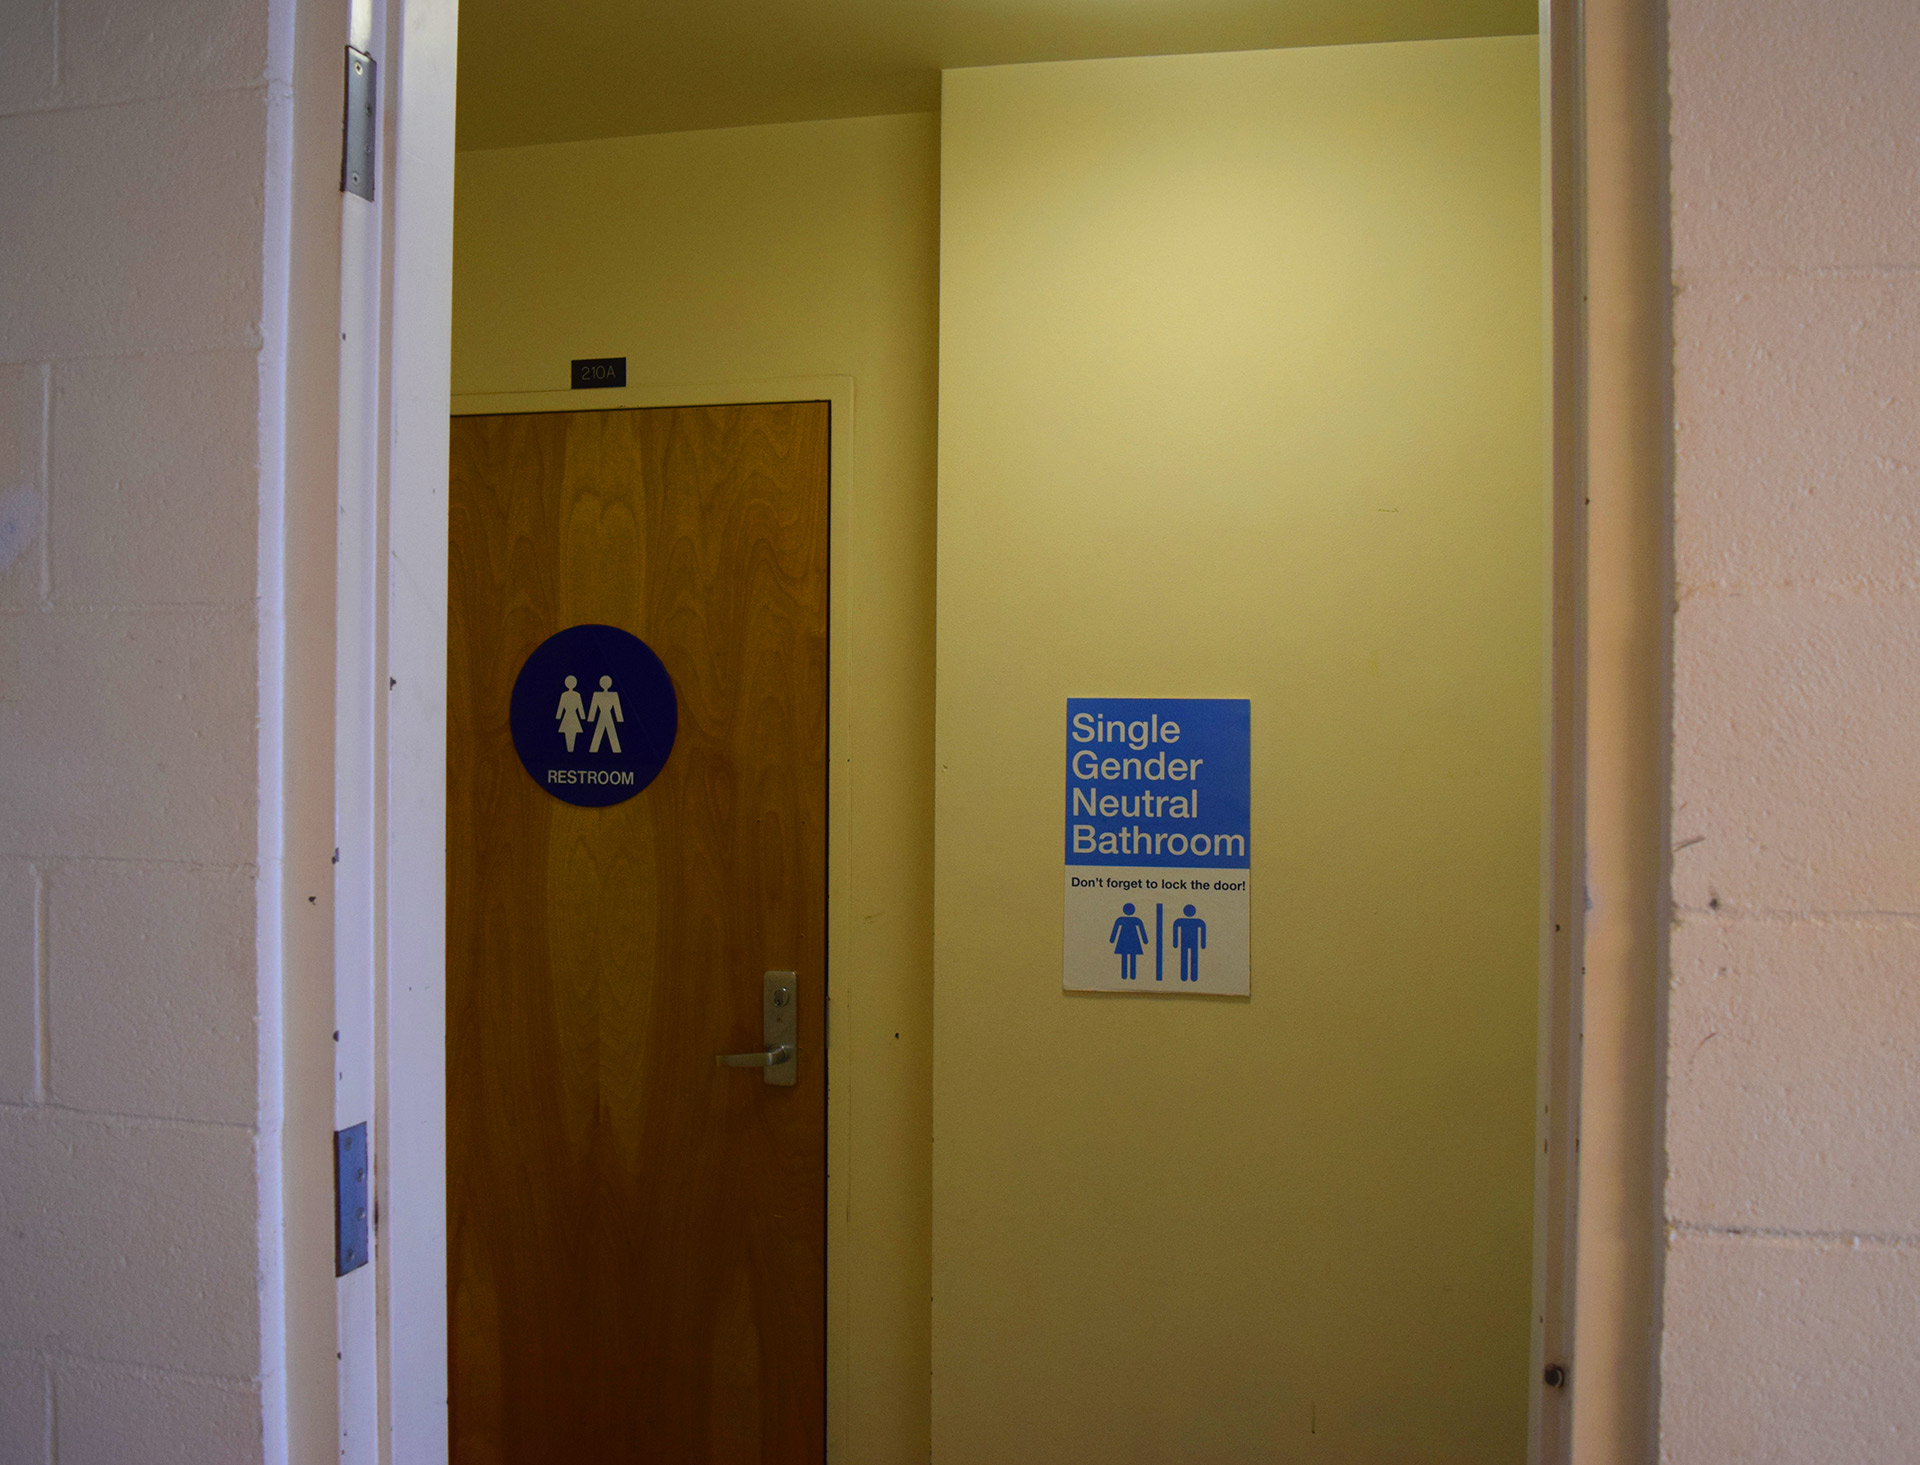 Just because there’s representation at Cal Poly doesn’t mean there isn’t controversy. Pictured here is the gender neutral bathroom in the Graphic Arts building on the Cal Poly campus. The bathroom was added in November 2017, as all single-use bathrooms on campus were updated with gender-neutral signage. The change was a response to the 2016-17 national controversy concerning gender-neutral bathrooms and the acceptance of transgender people in bathrooms of their gender. Once AB-1732 was signed into California law in 2016, public restroom signage is required to be accepting of all genders, but the change has been slow. In 2017, AB 1887 was issued, banning CSU funding or requirement of student or faculty trips to states who don’t have a similar bathroom policy or who allow discrimination based on gender or sexality. Photo Credit: Katelyn Biddle